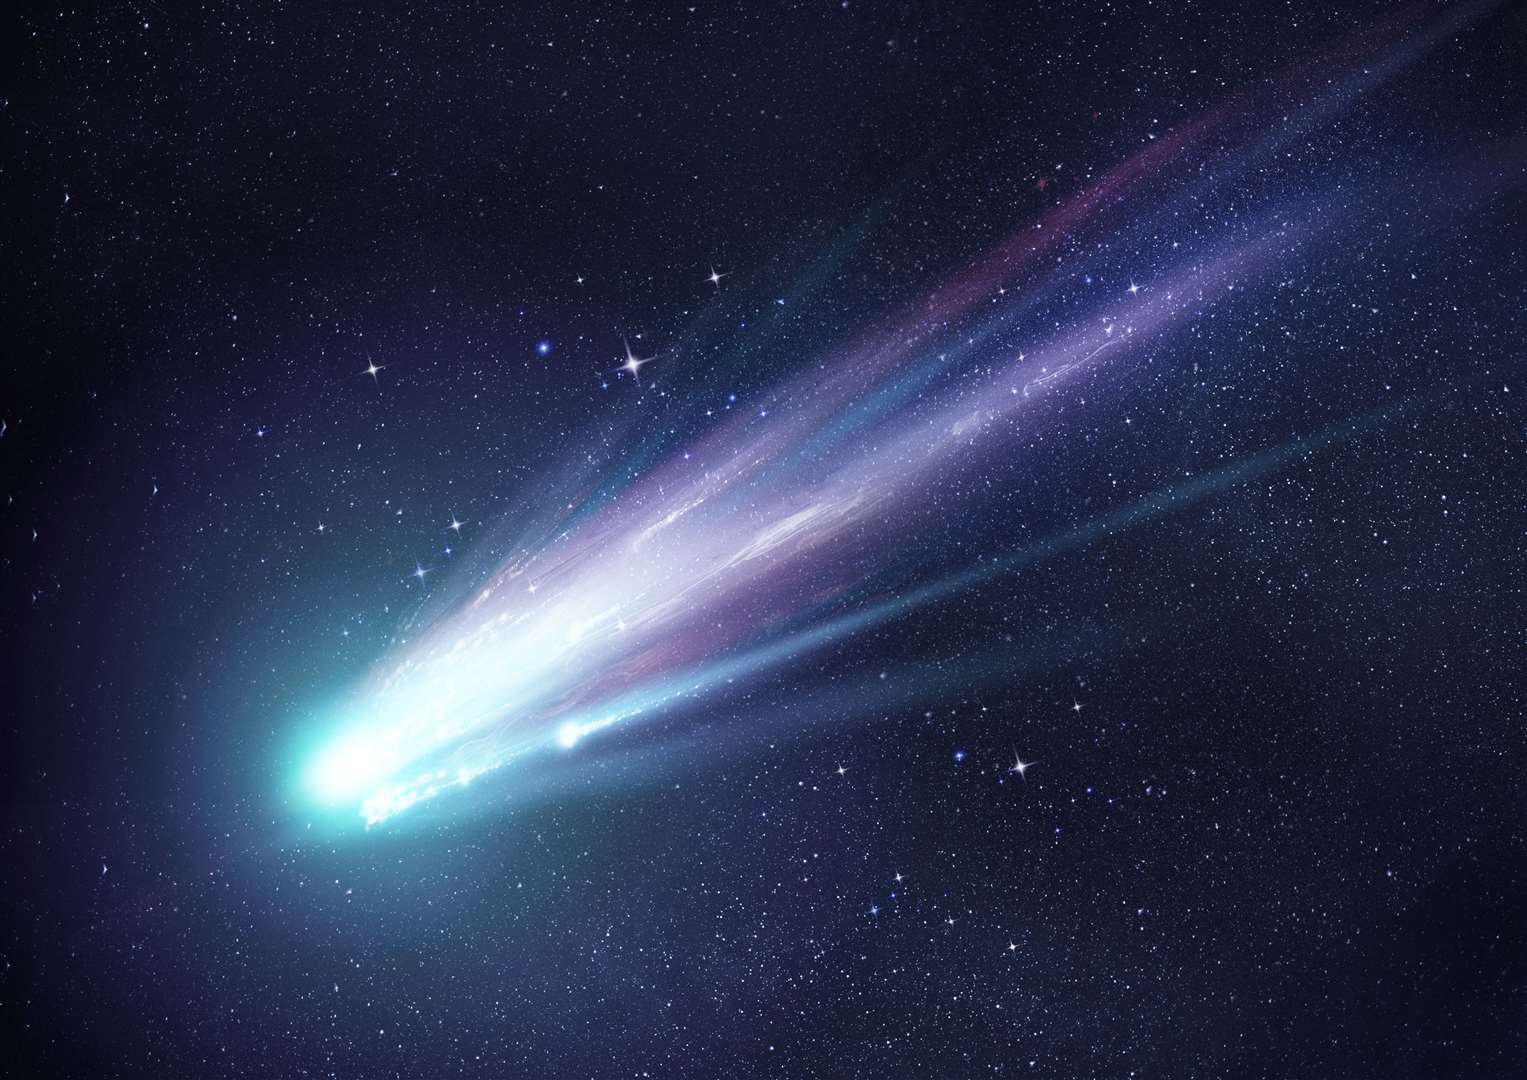 The comet was only discovered in August by someone taking photos of the sky. Image: Adobe stock image.